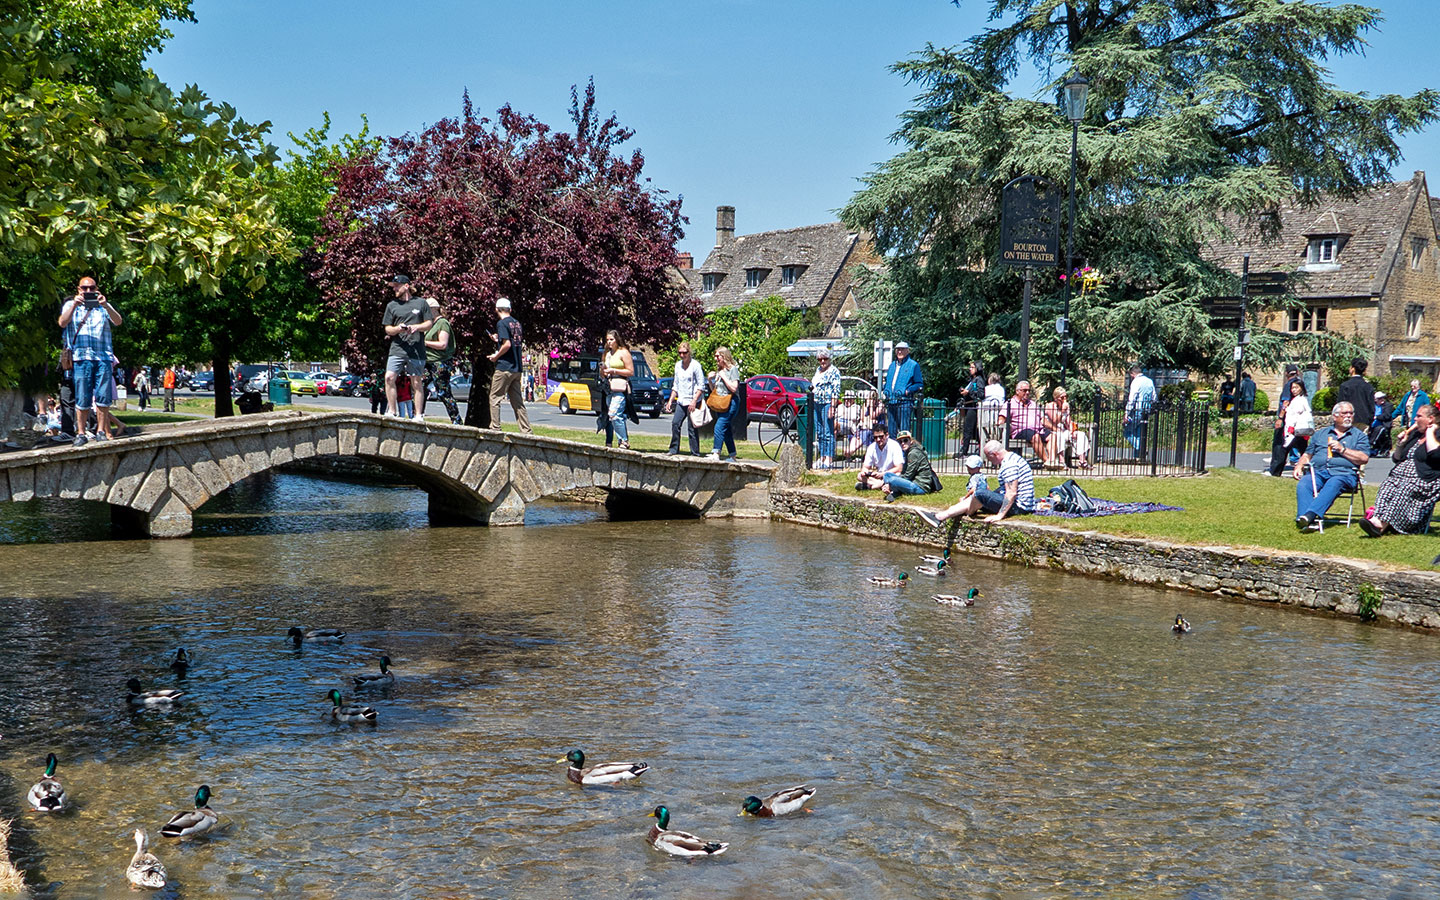 Ducks on the River Windrush in Bourton-on-the-Water